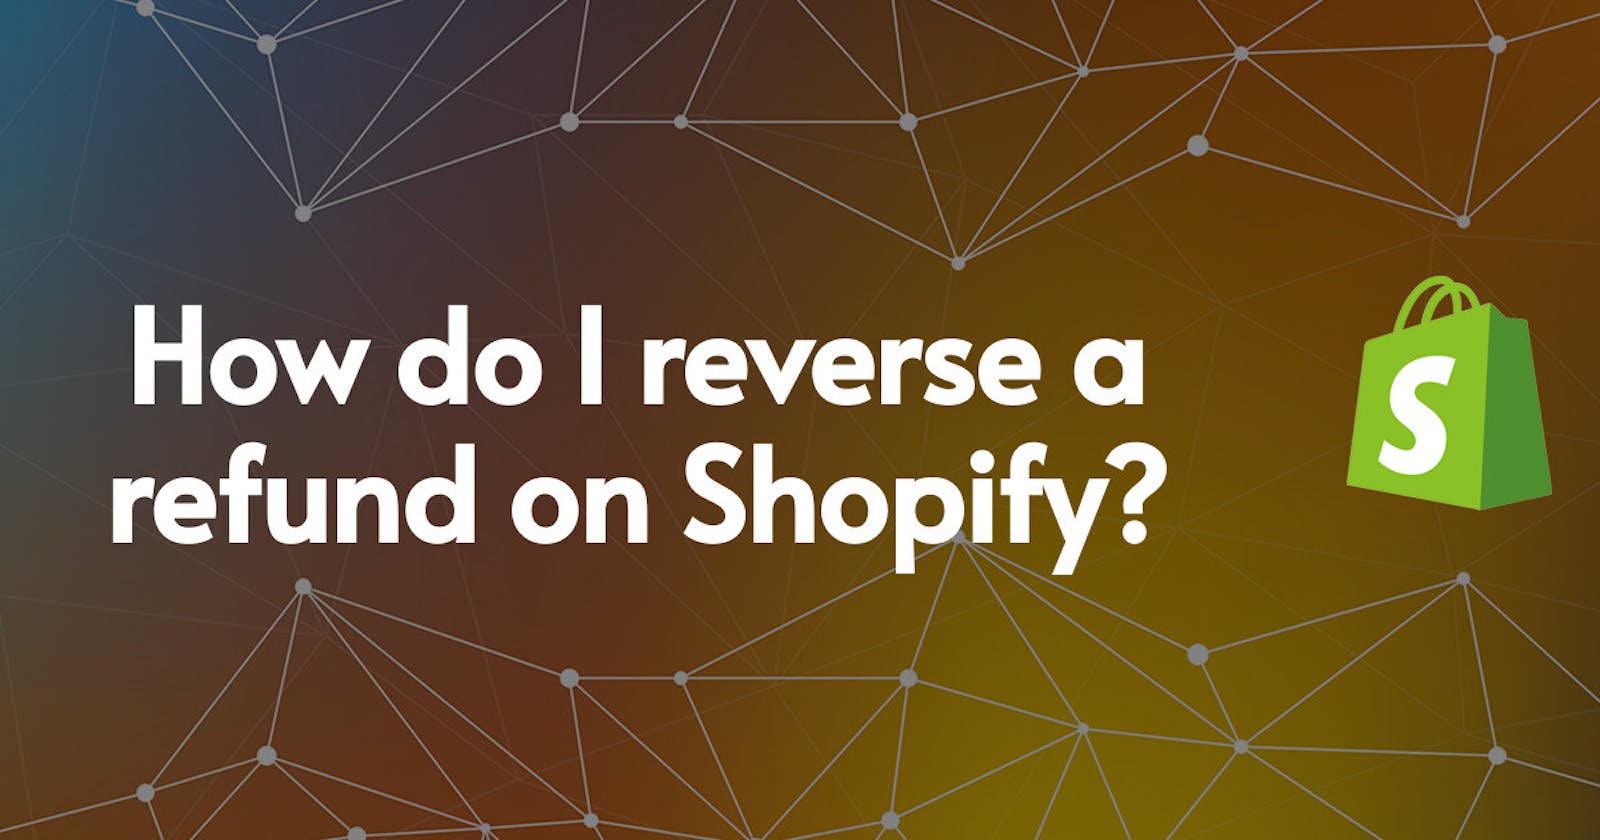 How do I reverse a refund on Shopify?